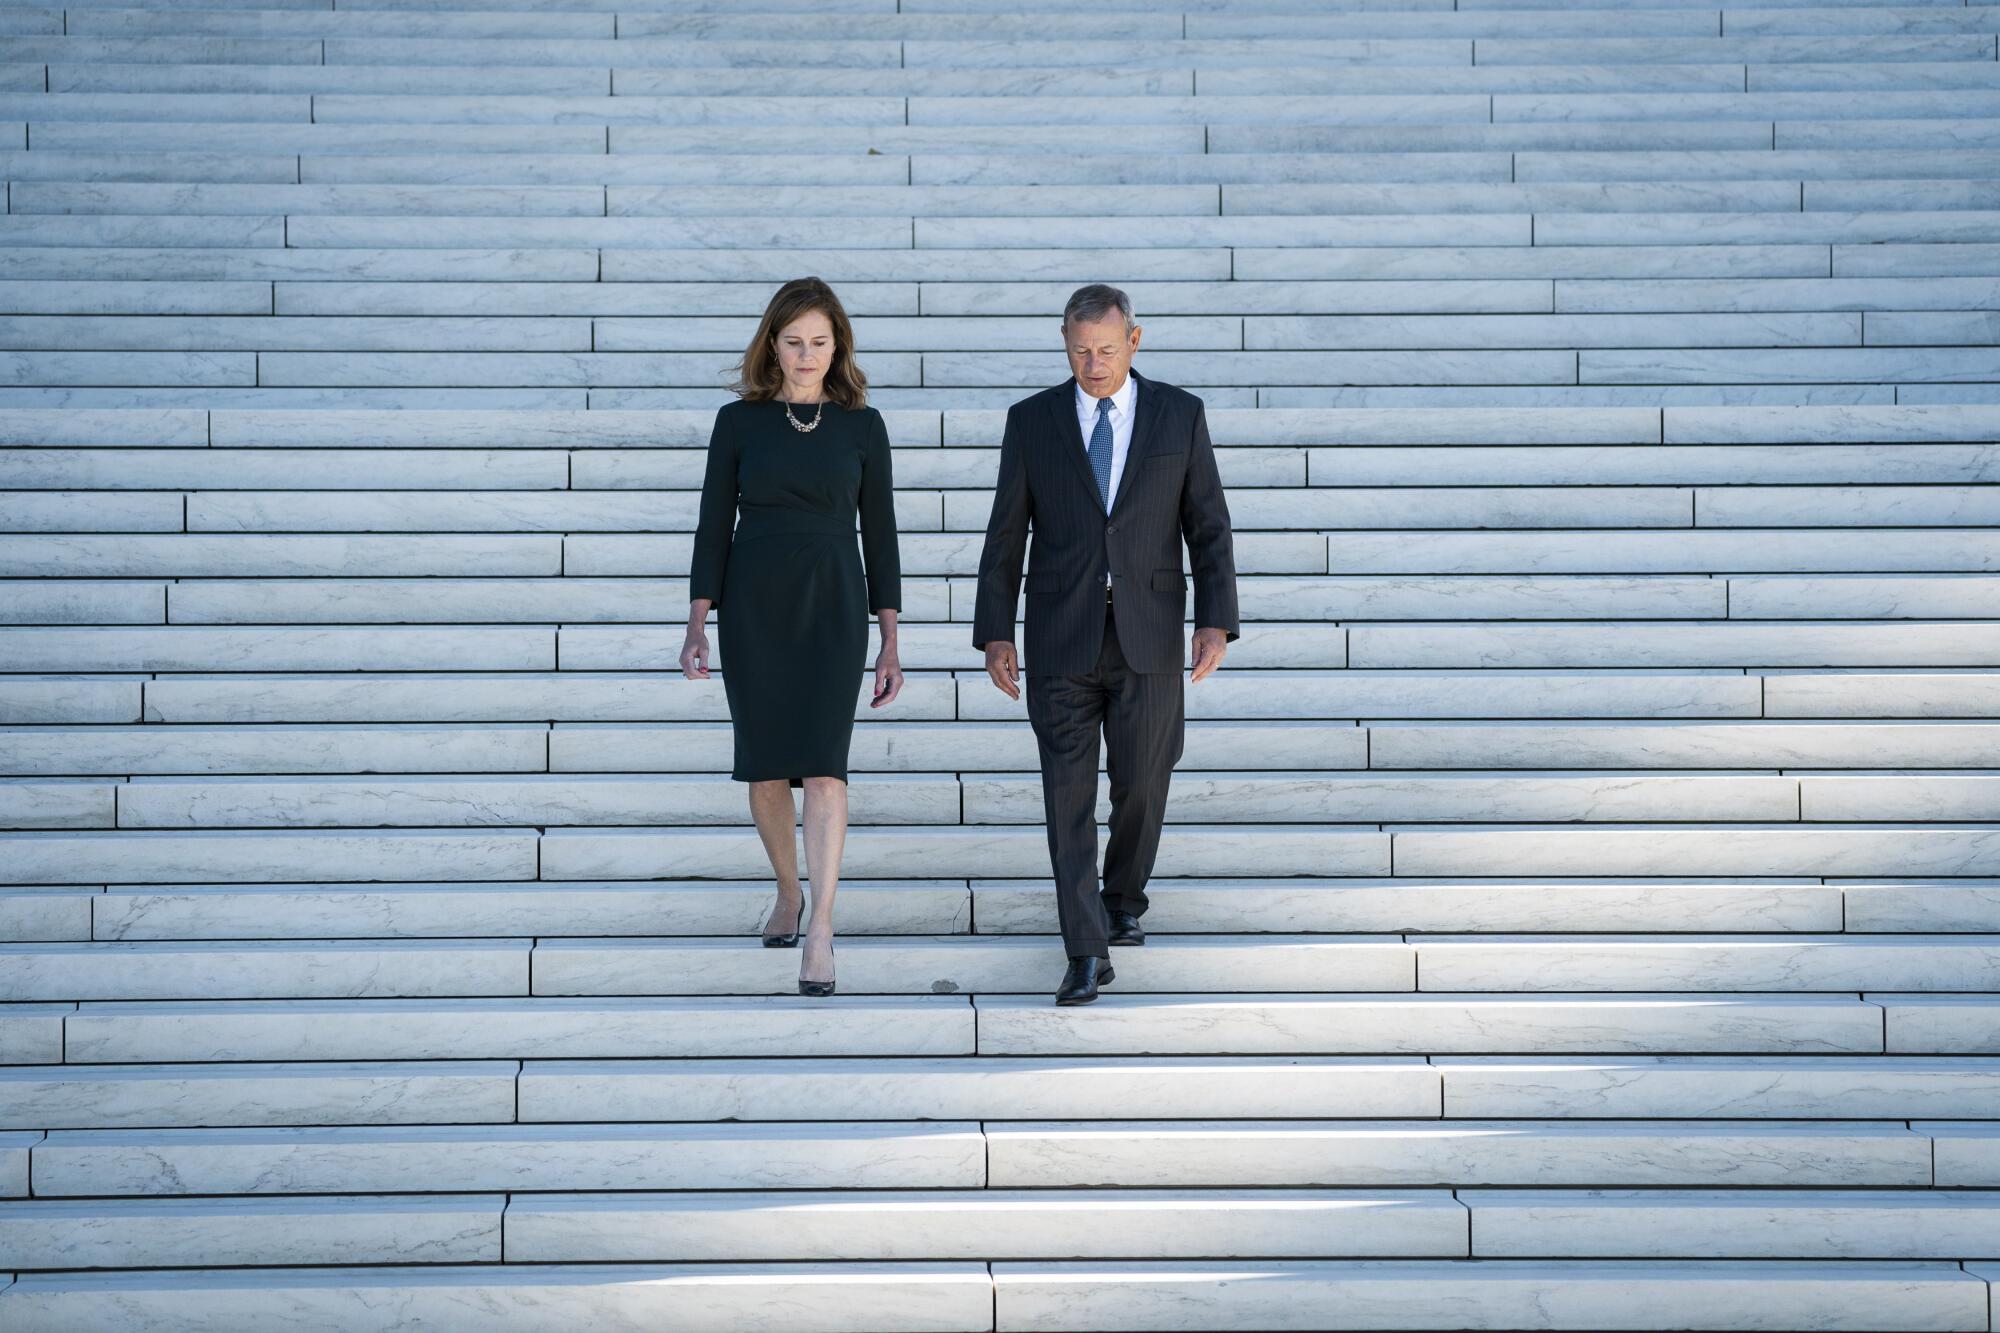 Justice Amy Coney Barrett with Chief Justice John G. Roberts Jr. walking down the steps of the Supreme Court